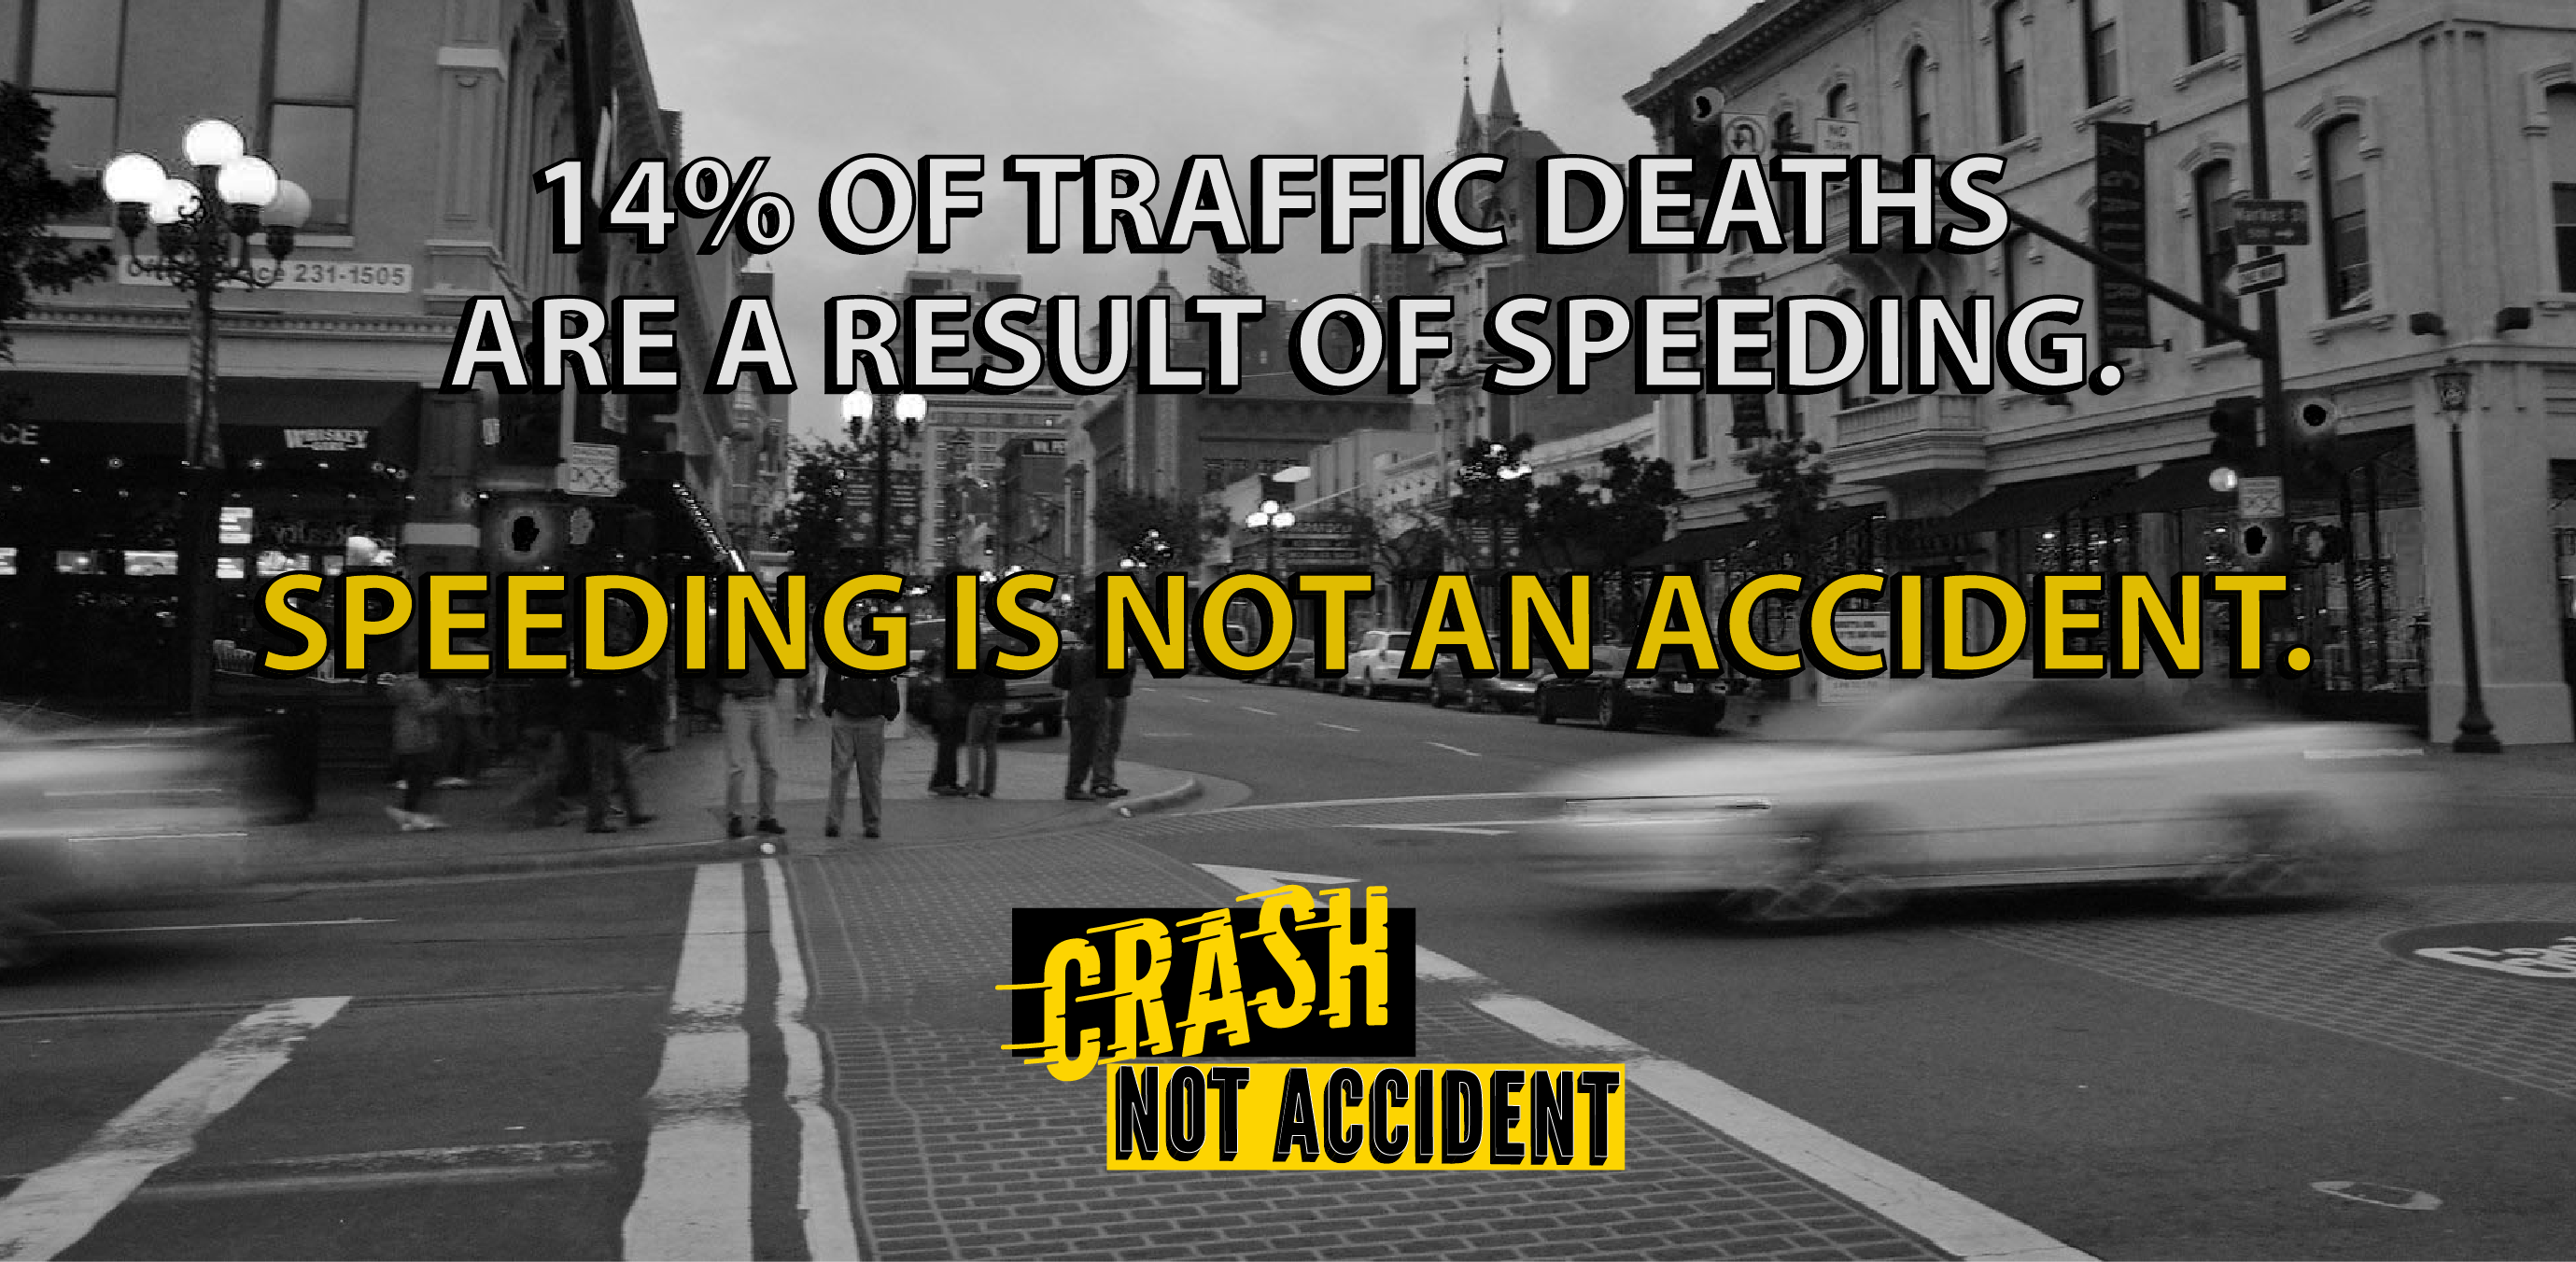 Crash+Not+Accident+San+Diego+Campaign+Launched+to+Raise+Awareness+for+Traffic+Safety